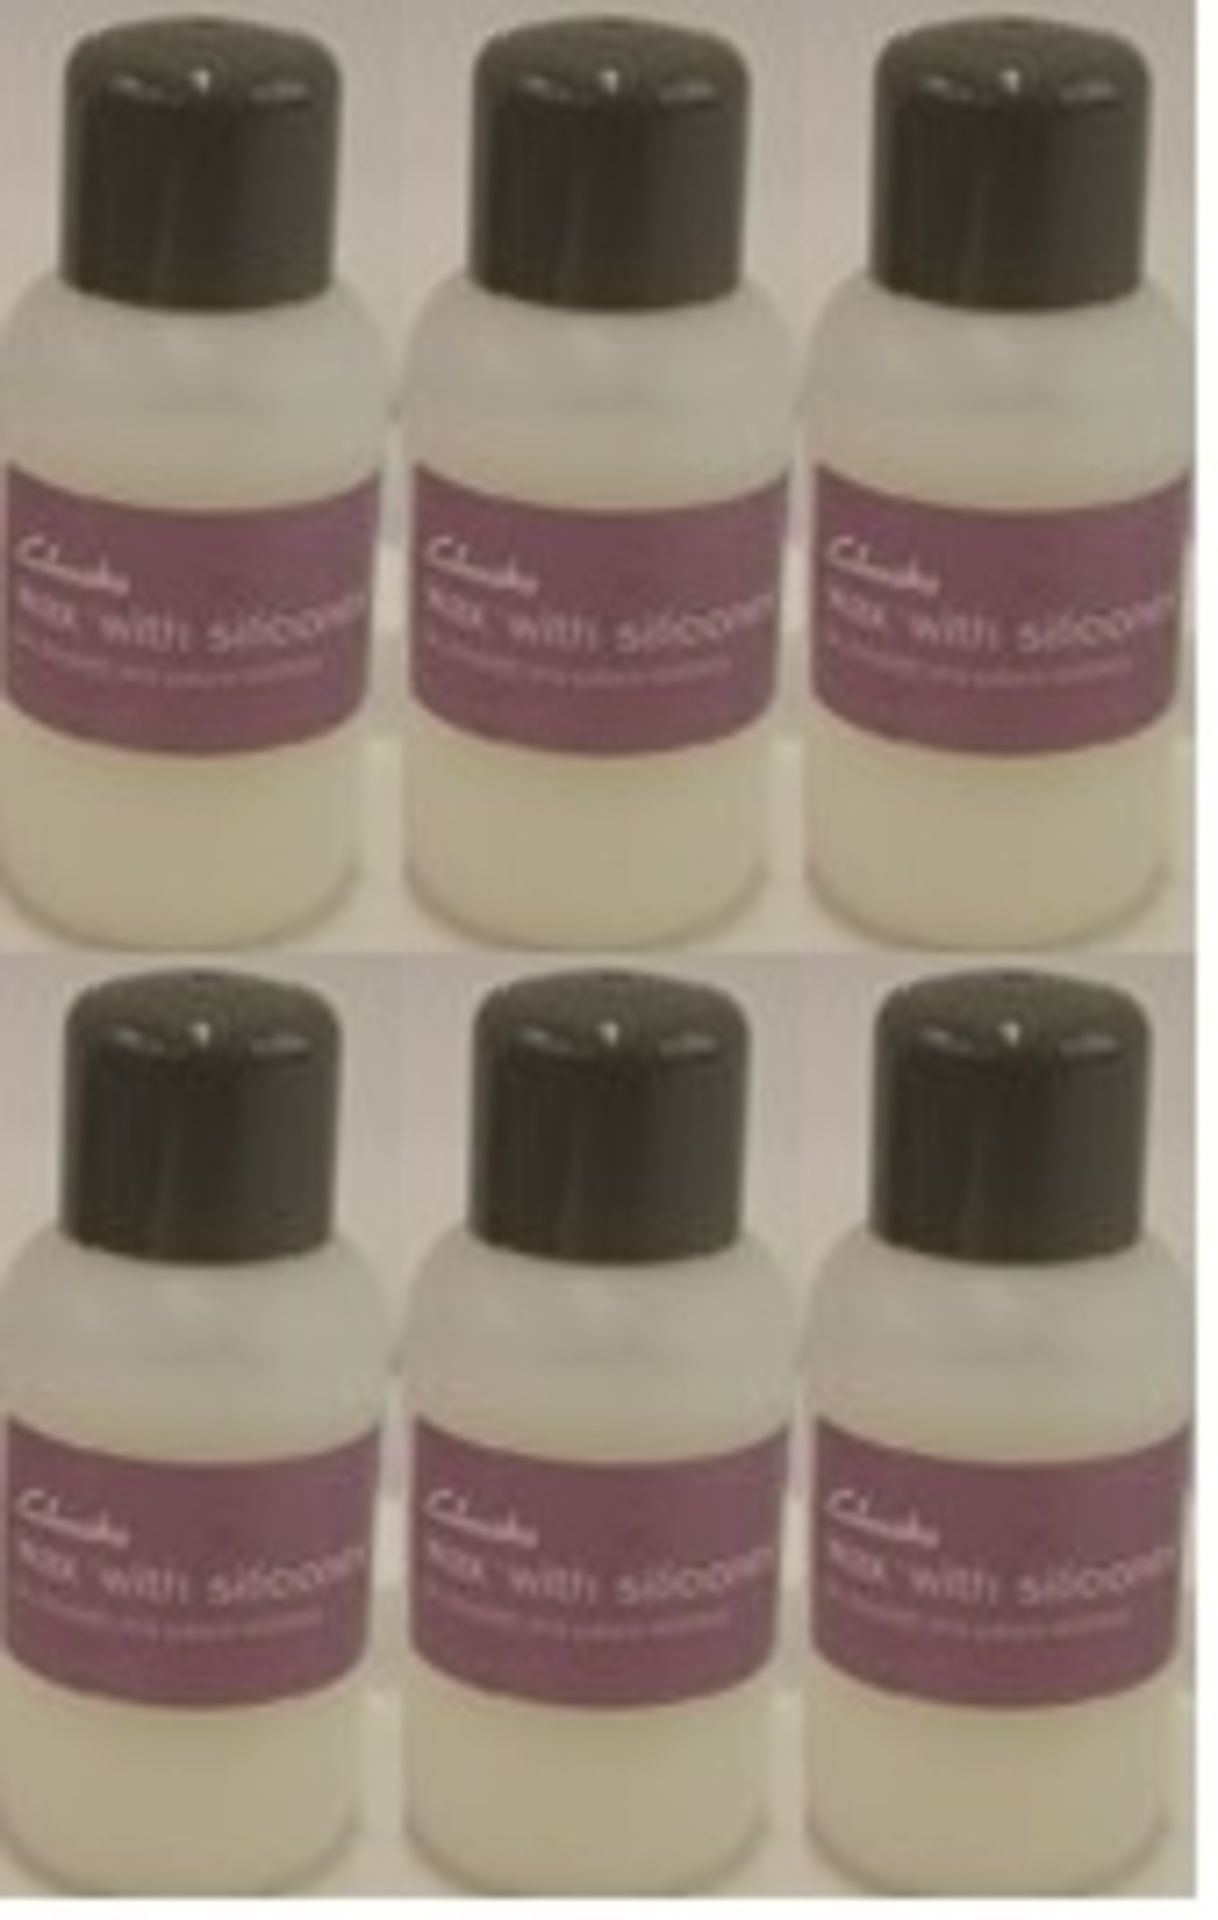 V Brand New Six Bottles Of 100ml Clarks Wax With Silicones For Smooth & Patent Leather ISP £45 (